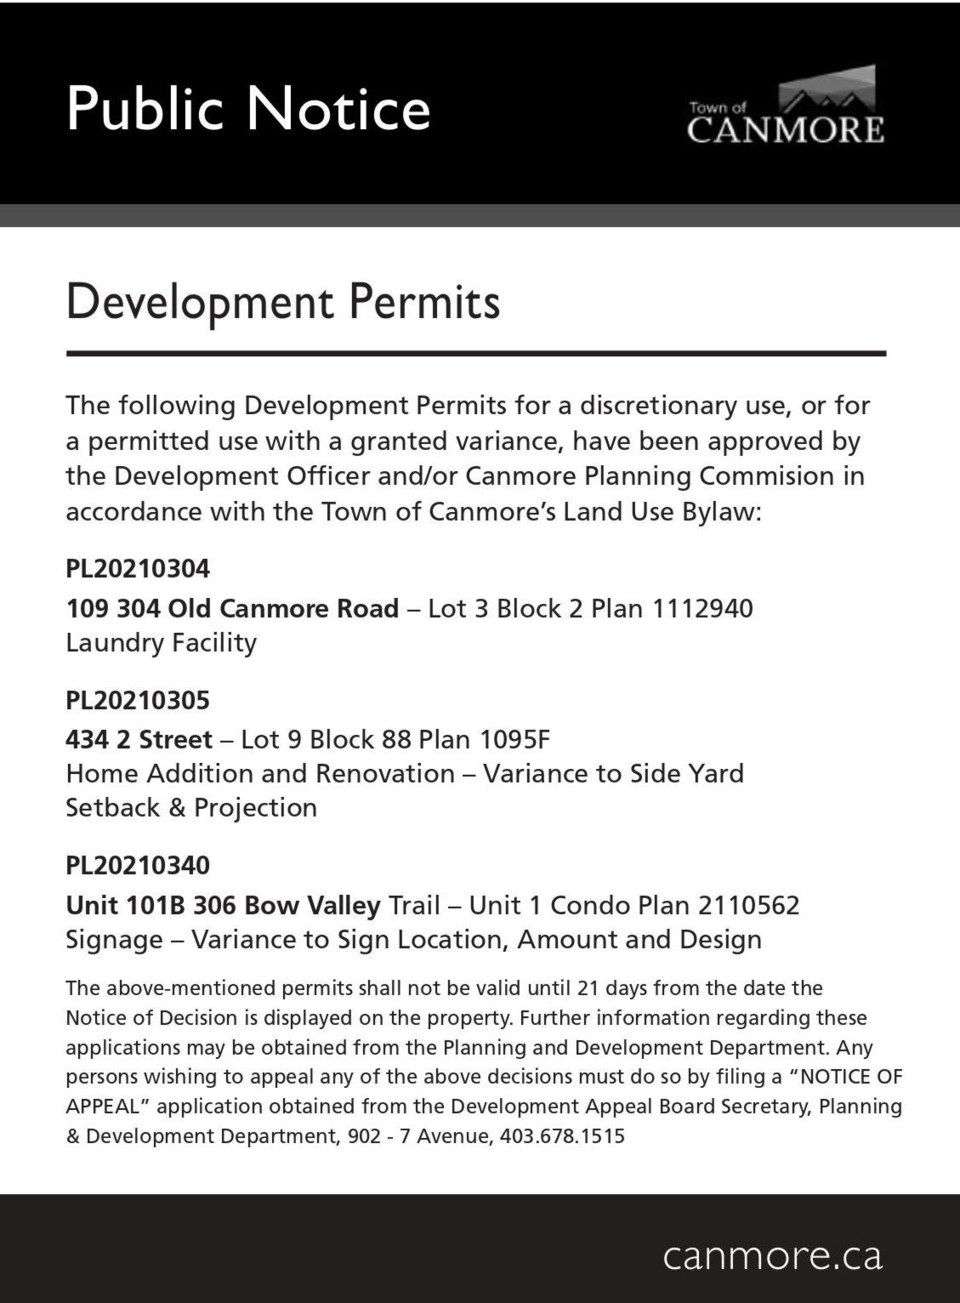 PUBLIC NOTICE – Town of Canmore - development permits